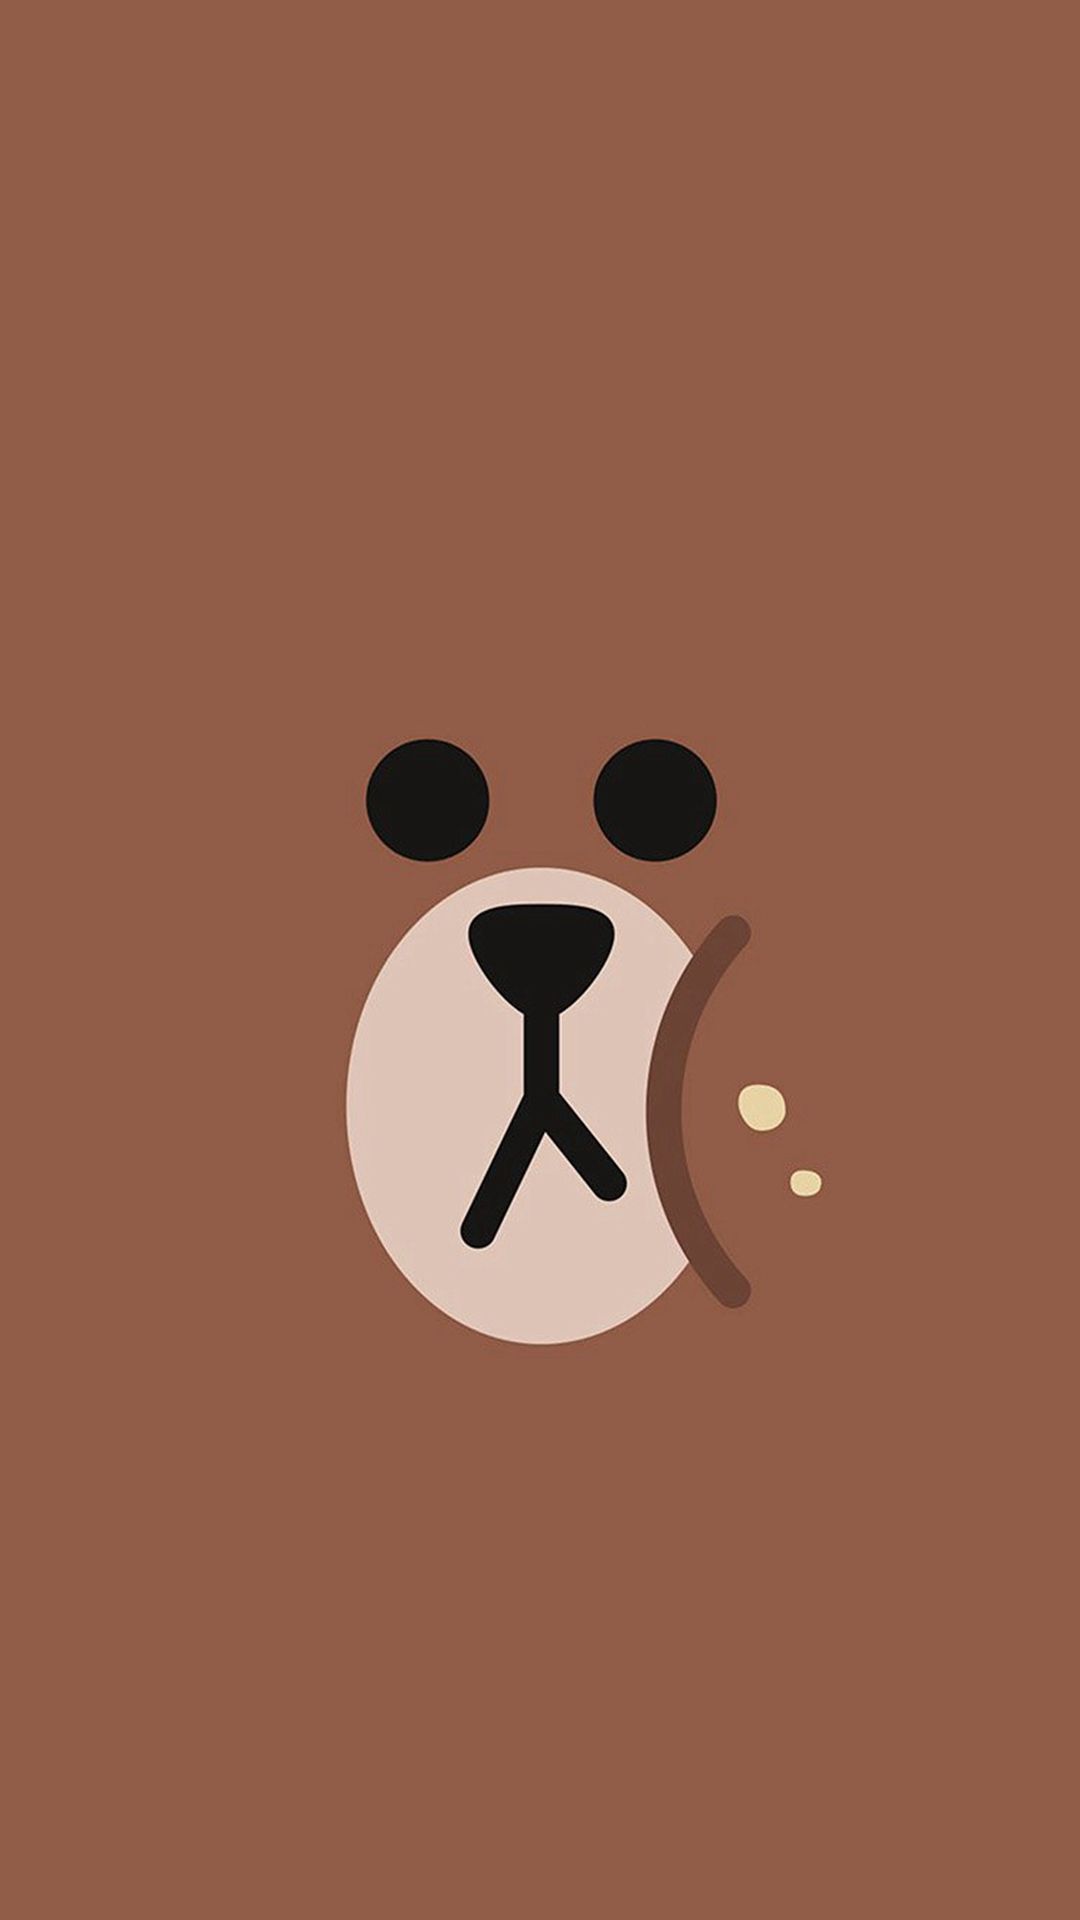 Line Charactor Cute Brown Bear Face Ilustration Art iPhone 8 Wallpaper Free Download